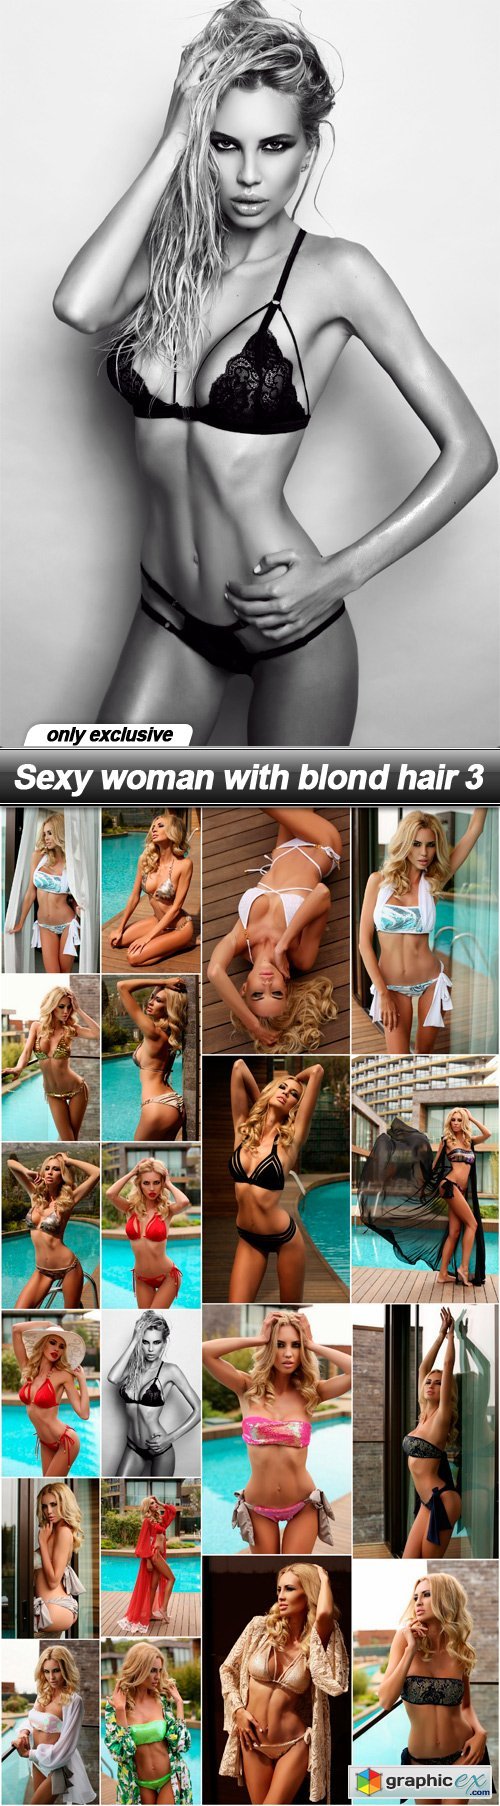 Sexy woman with blond hair 3 - 20 UHQ JPEG